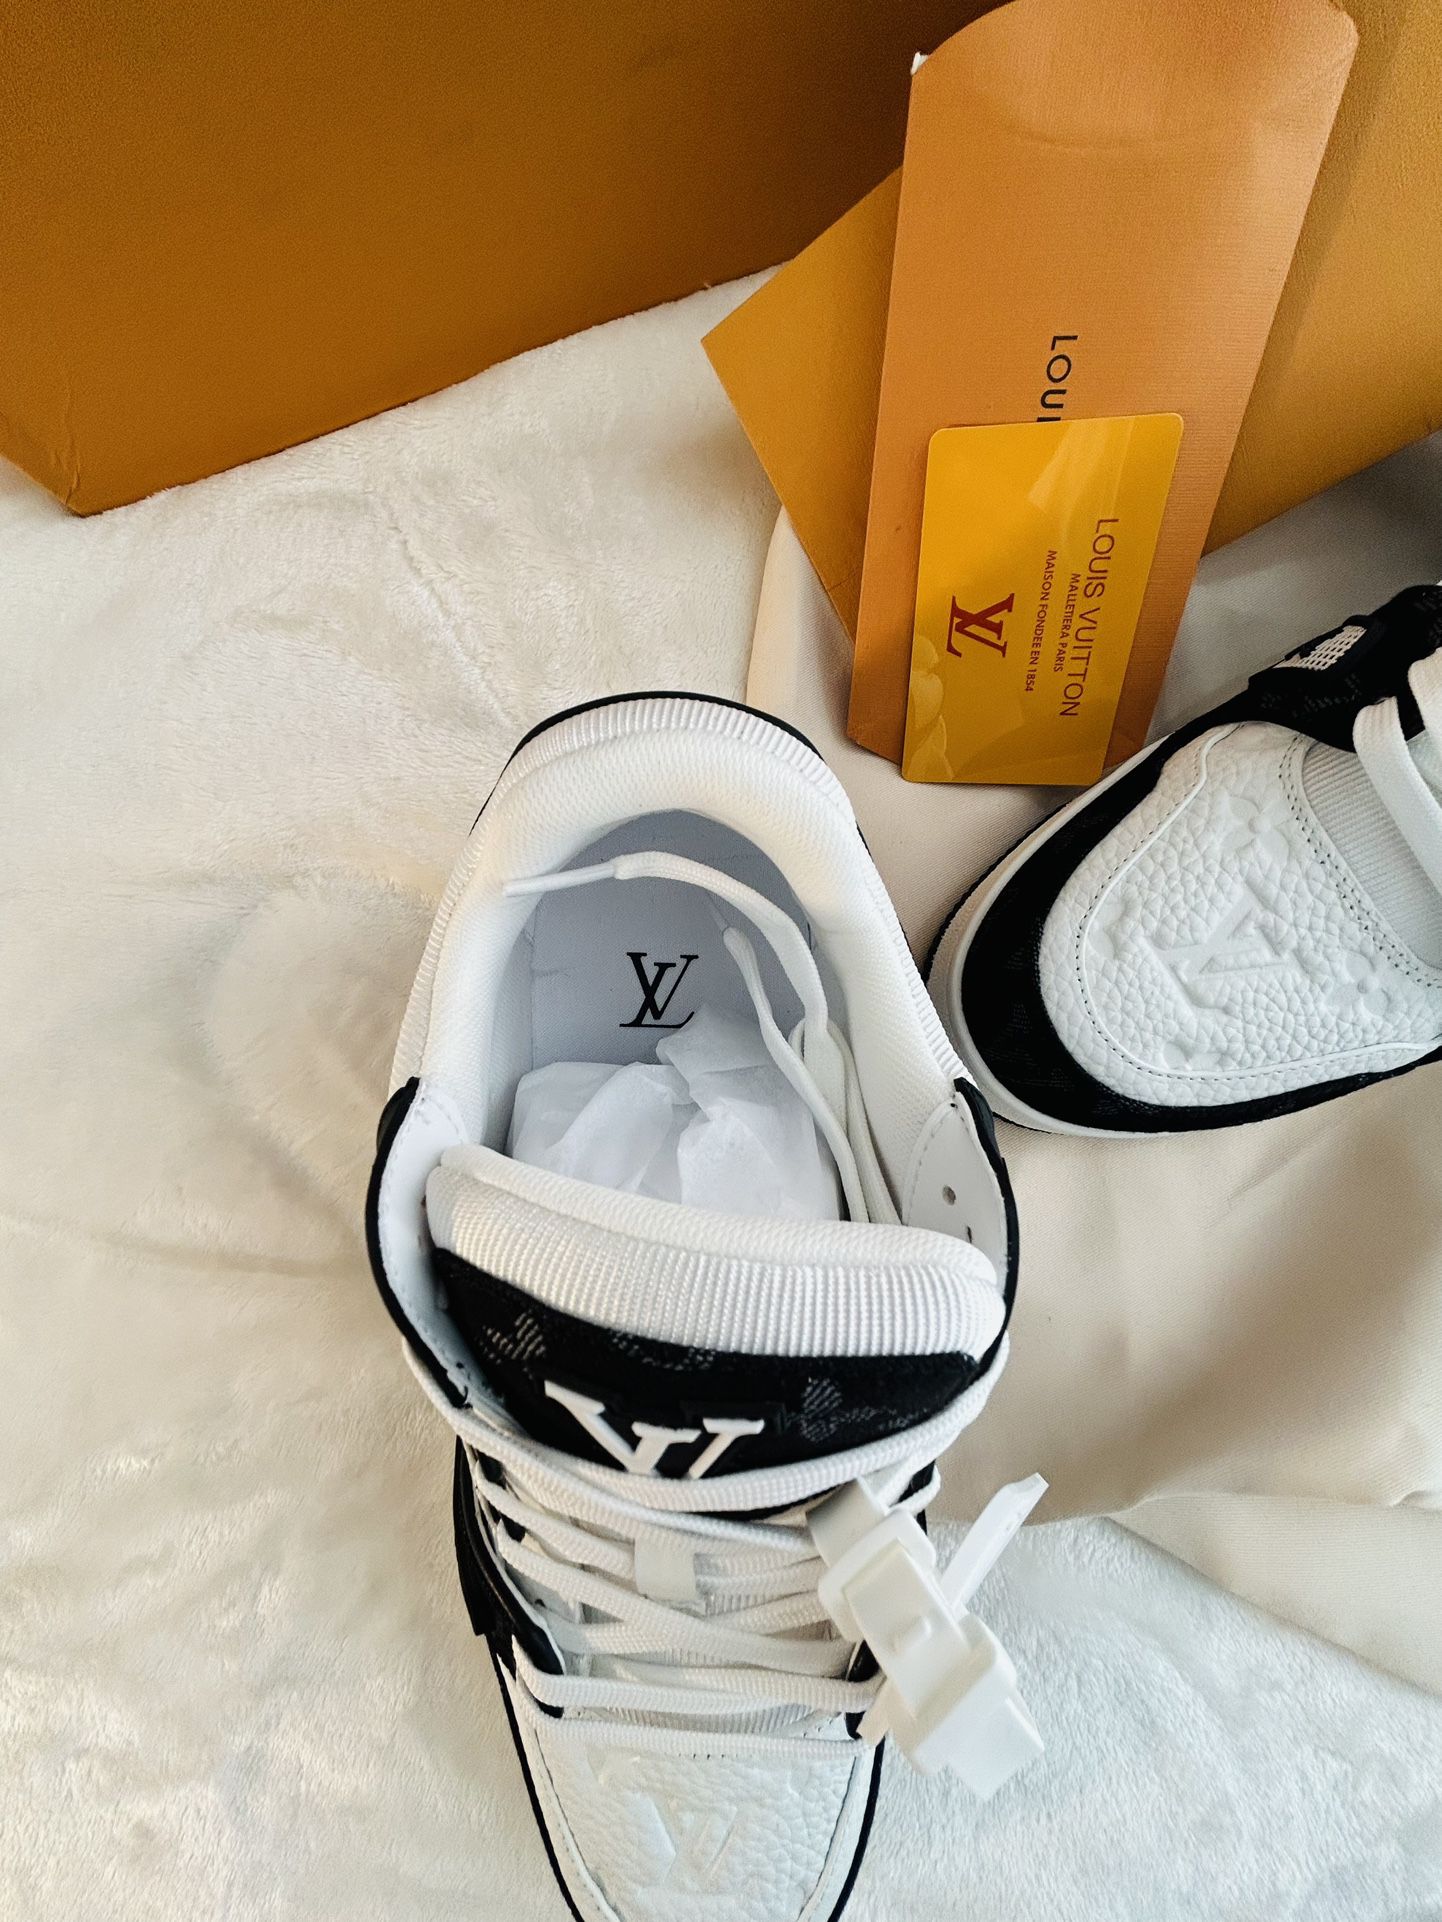 Louis Vuitton Trainer Sneaker For Men Size 8 for Sale in Los Angeles, CA -  OfferUp